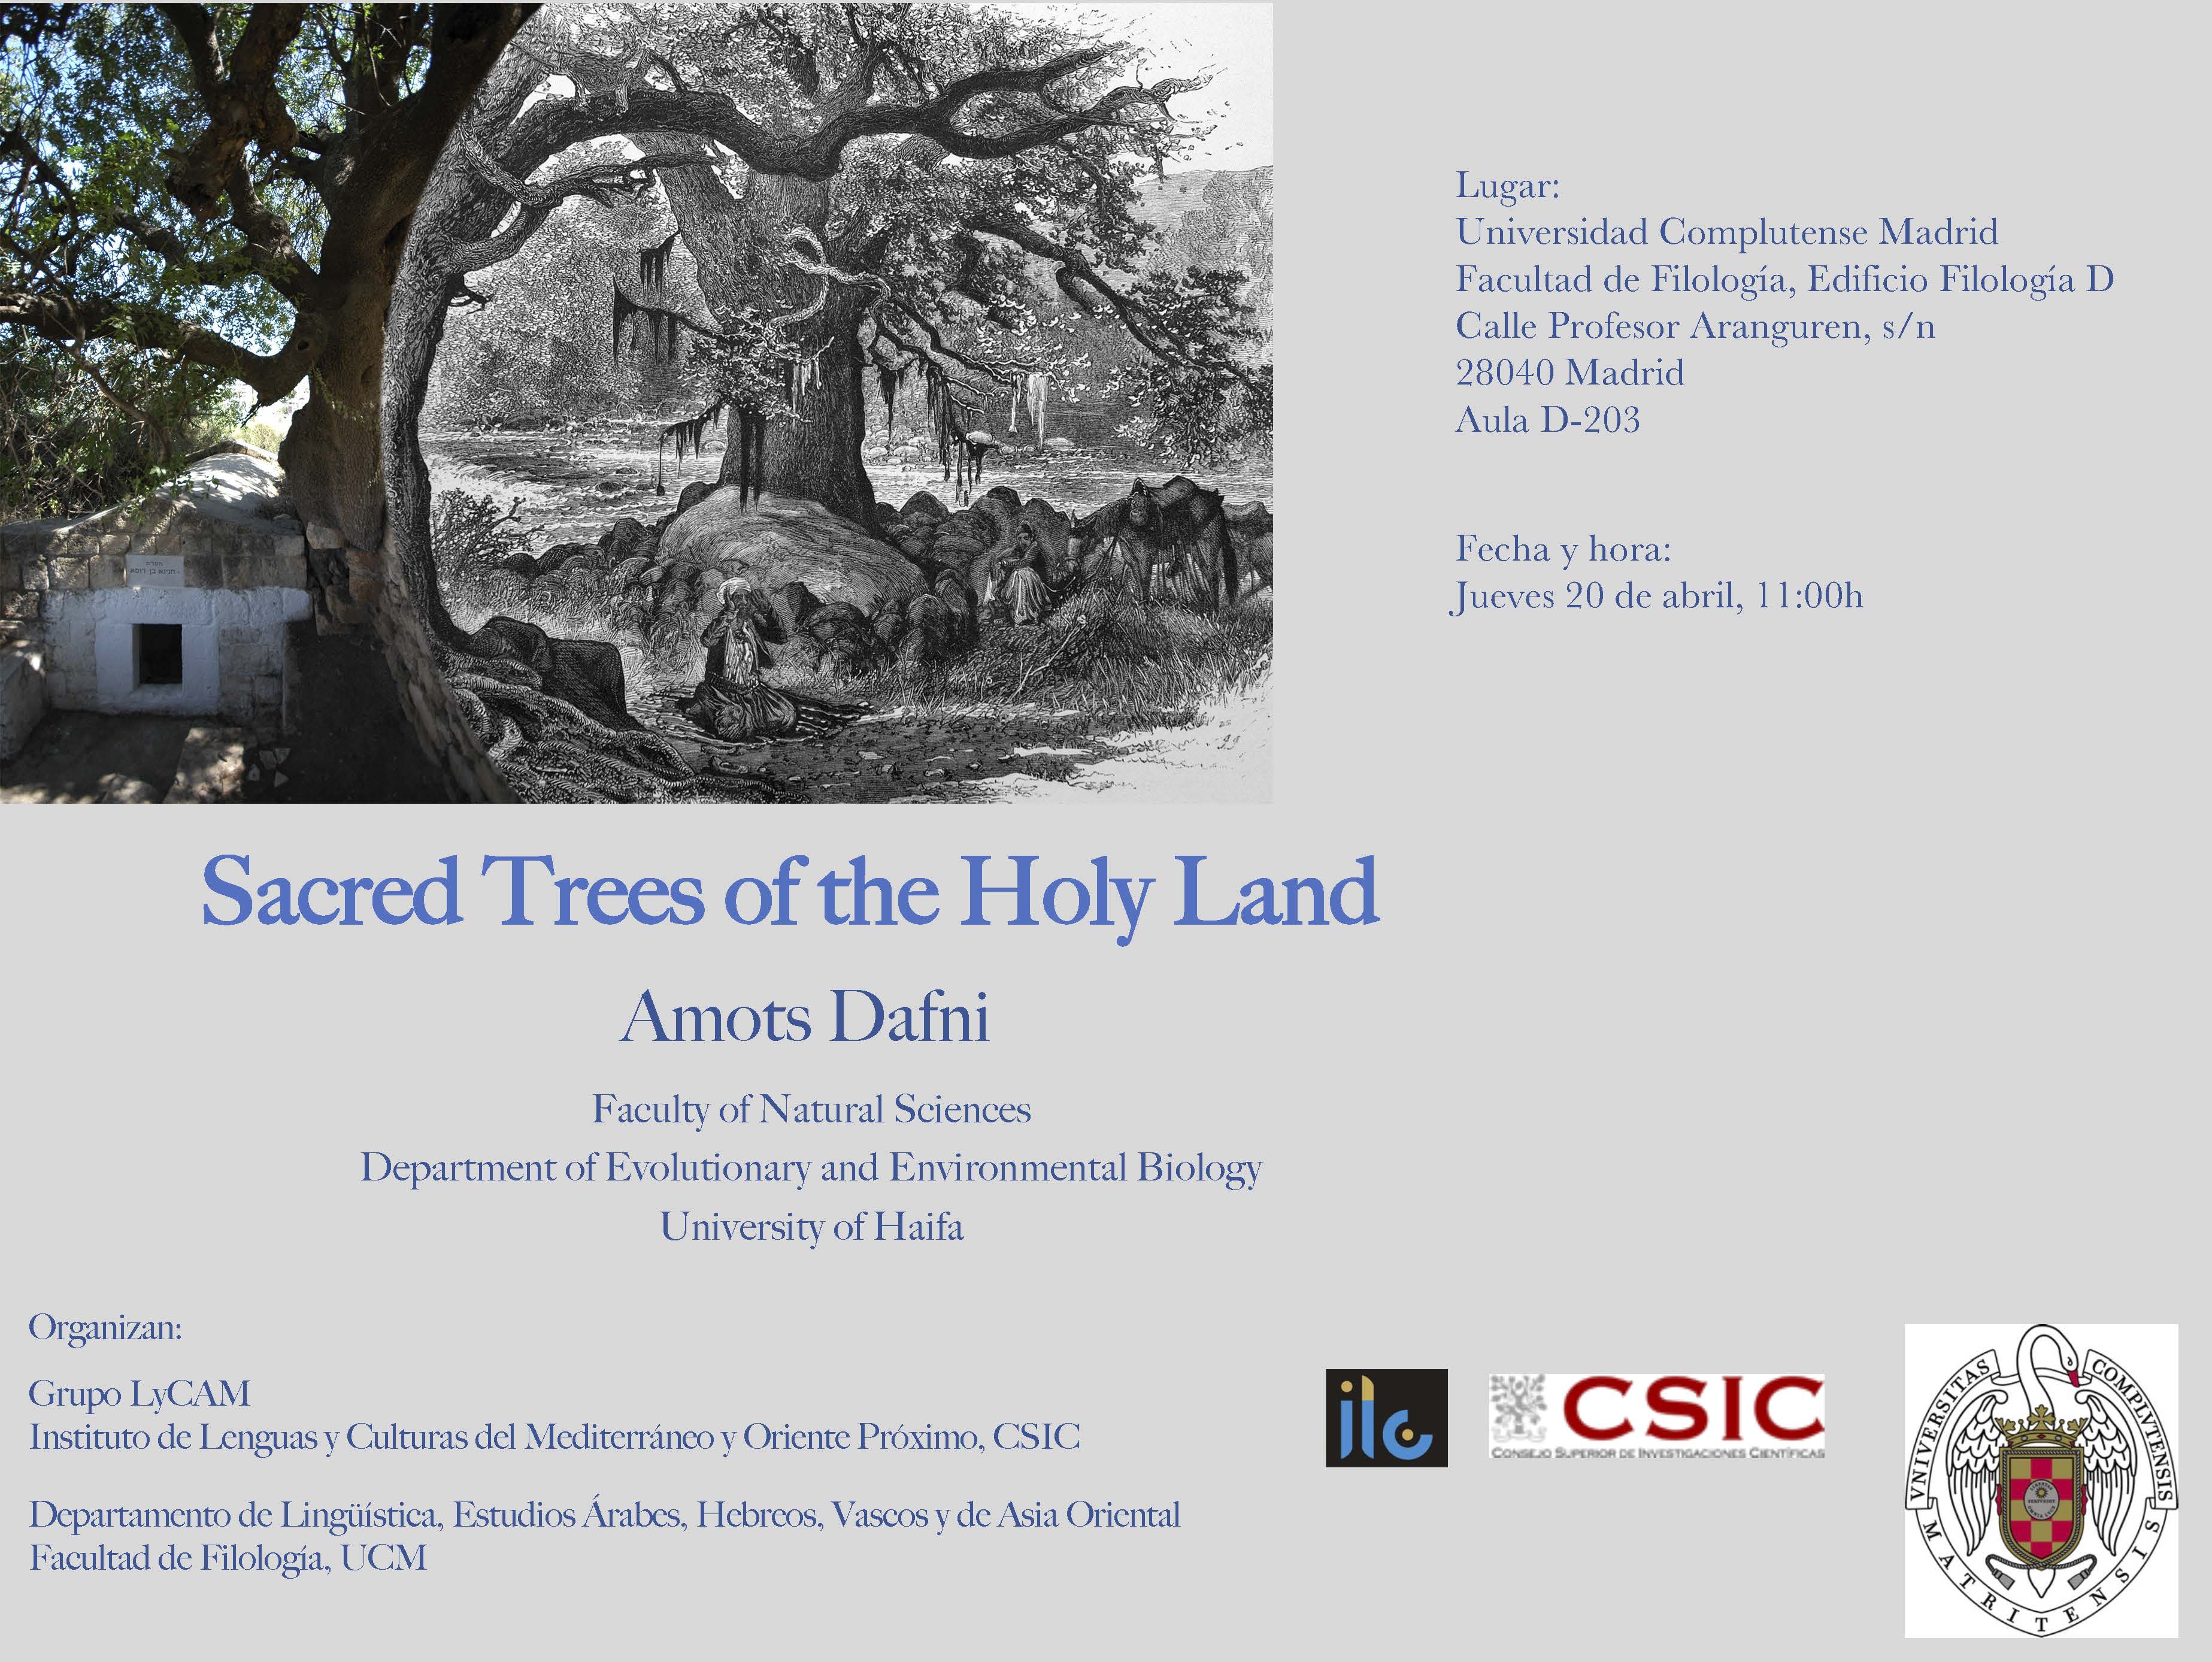 Conferencia "Sacred Trees of the Holy Land"